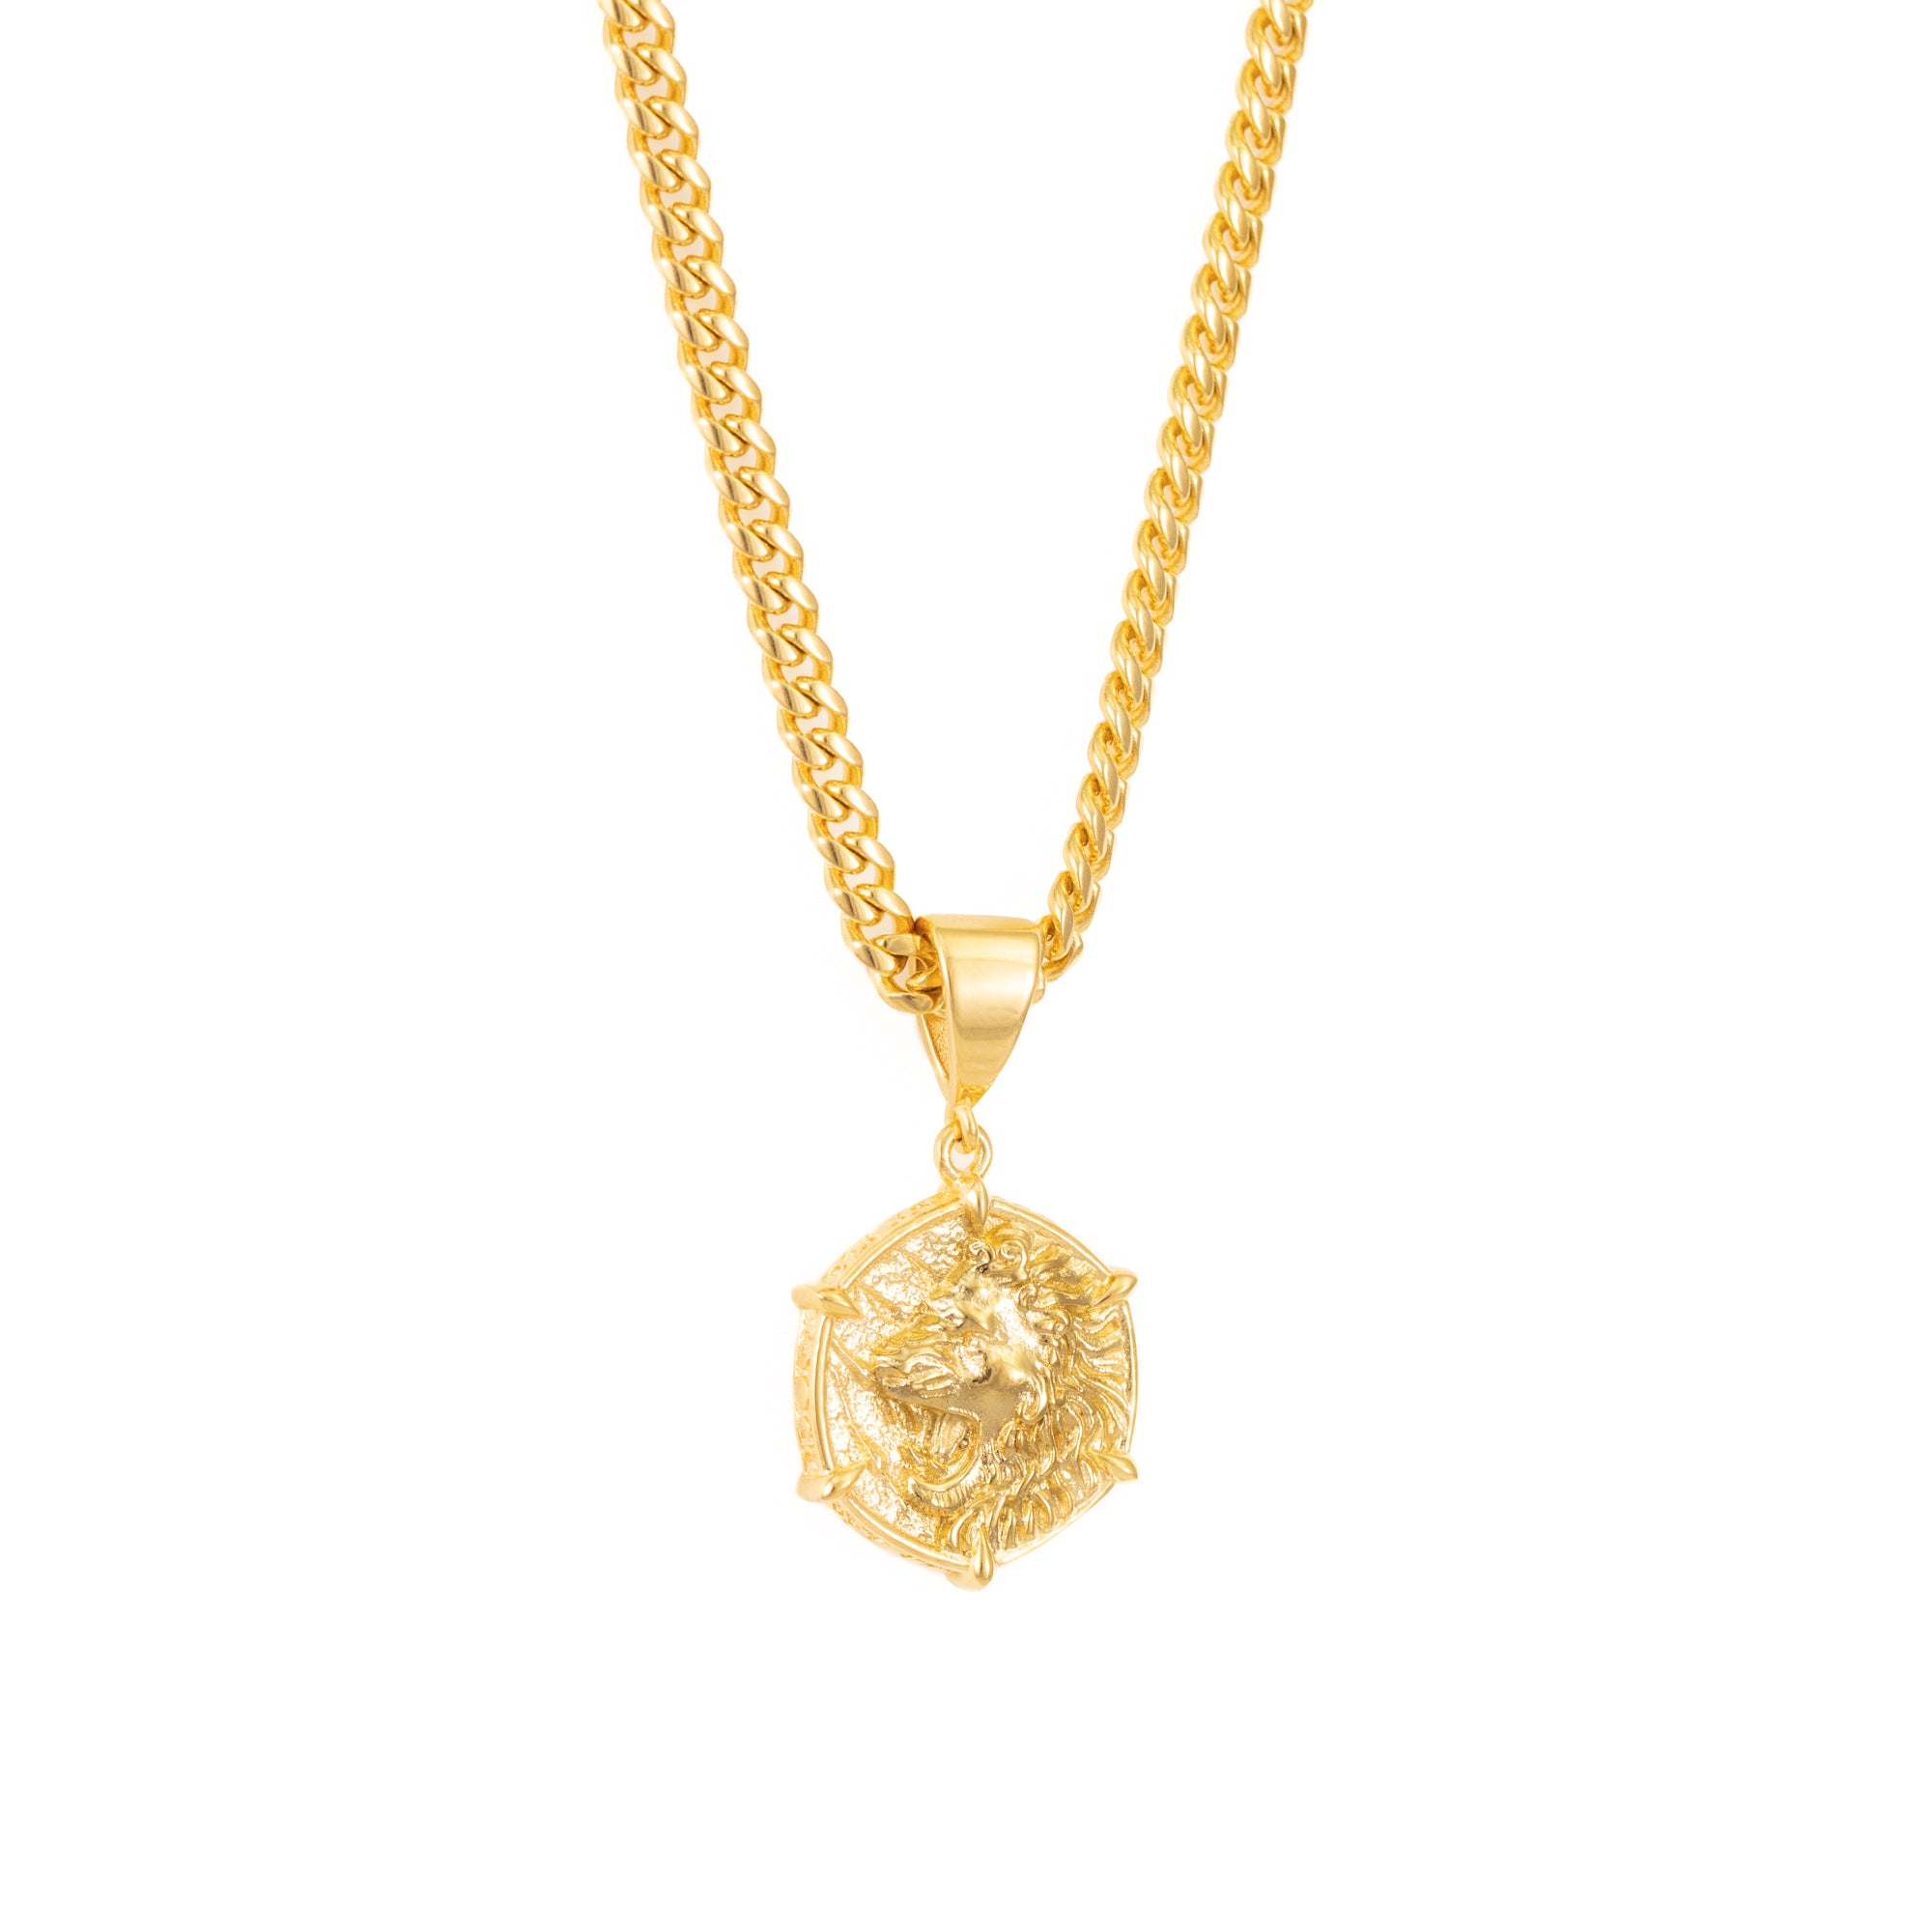 Buy 18K Gold Leo Zodiac Sign Pendant 492A767 Online from Vaibhav Jewellers